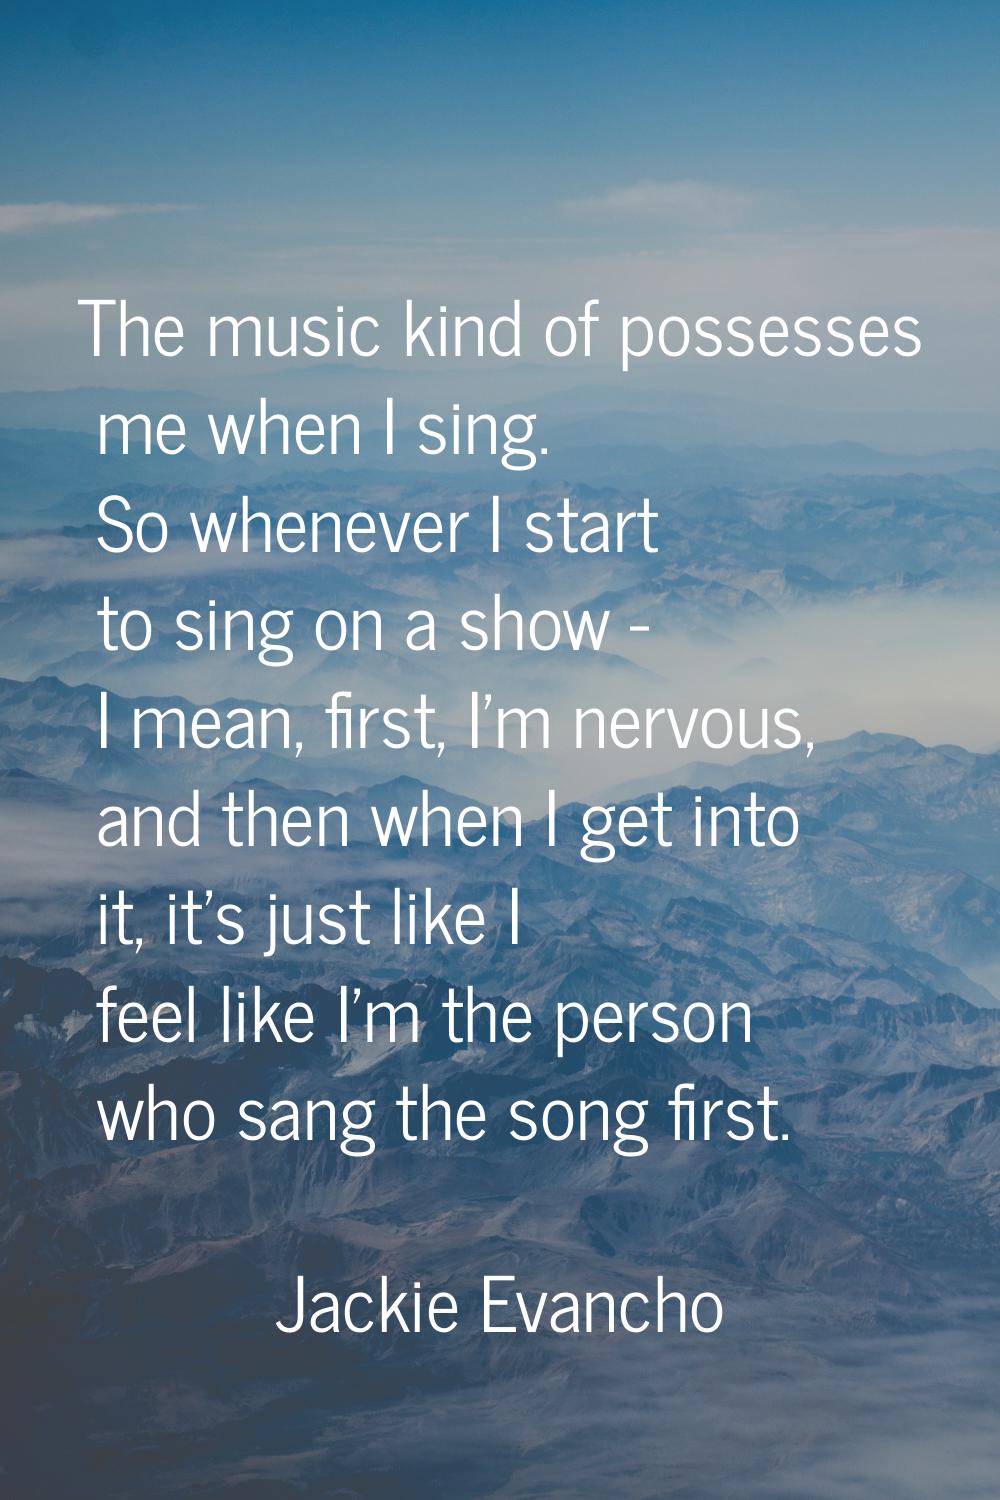 The music kind of possesses me when I sing. So whenever I start to sing on a show - I mean, first, 